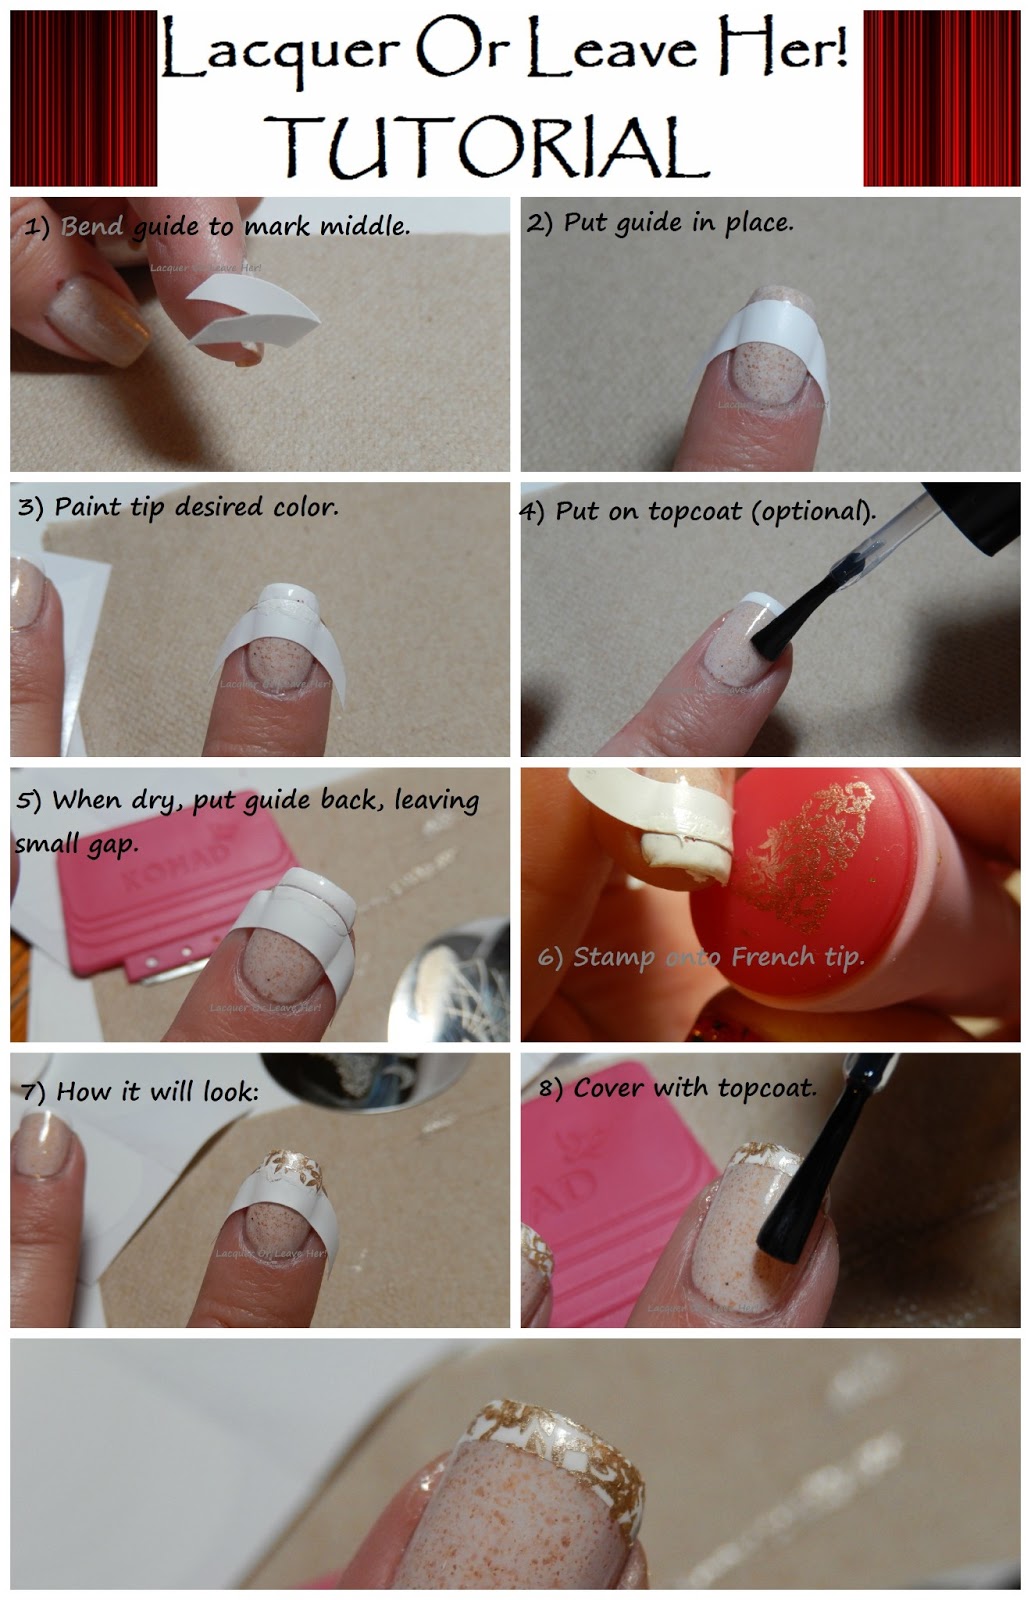 Lacquer or Leave Her!: Tutorial: Stamped French Manicure